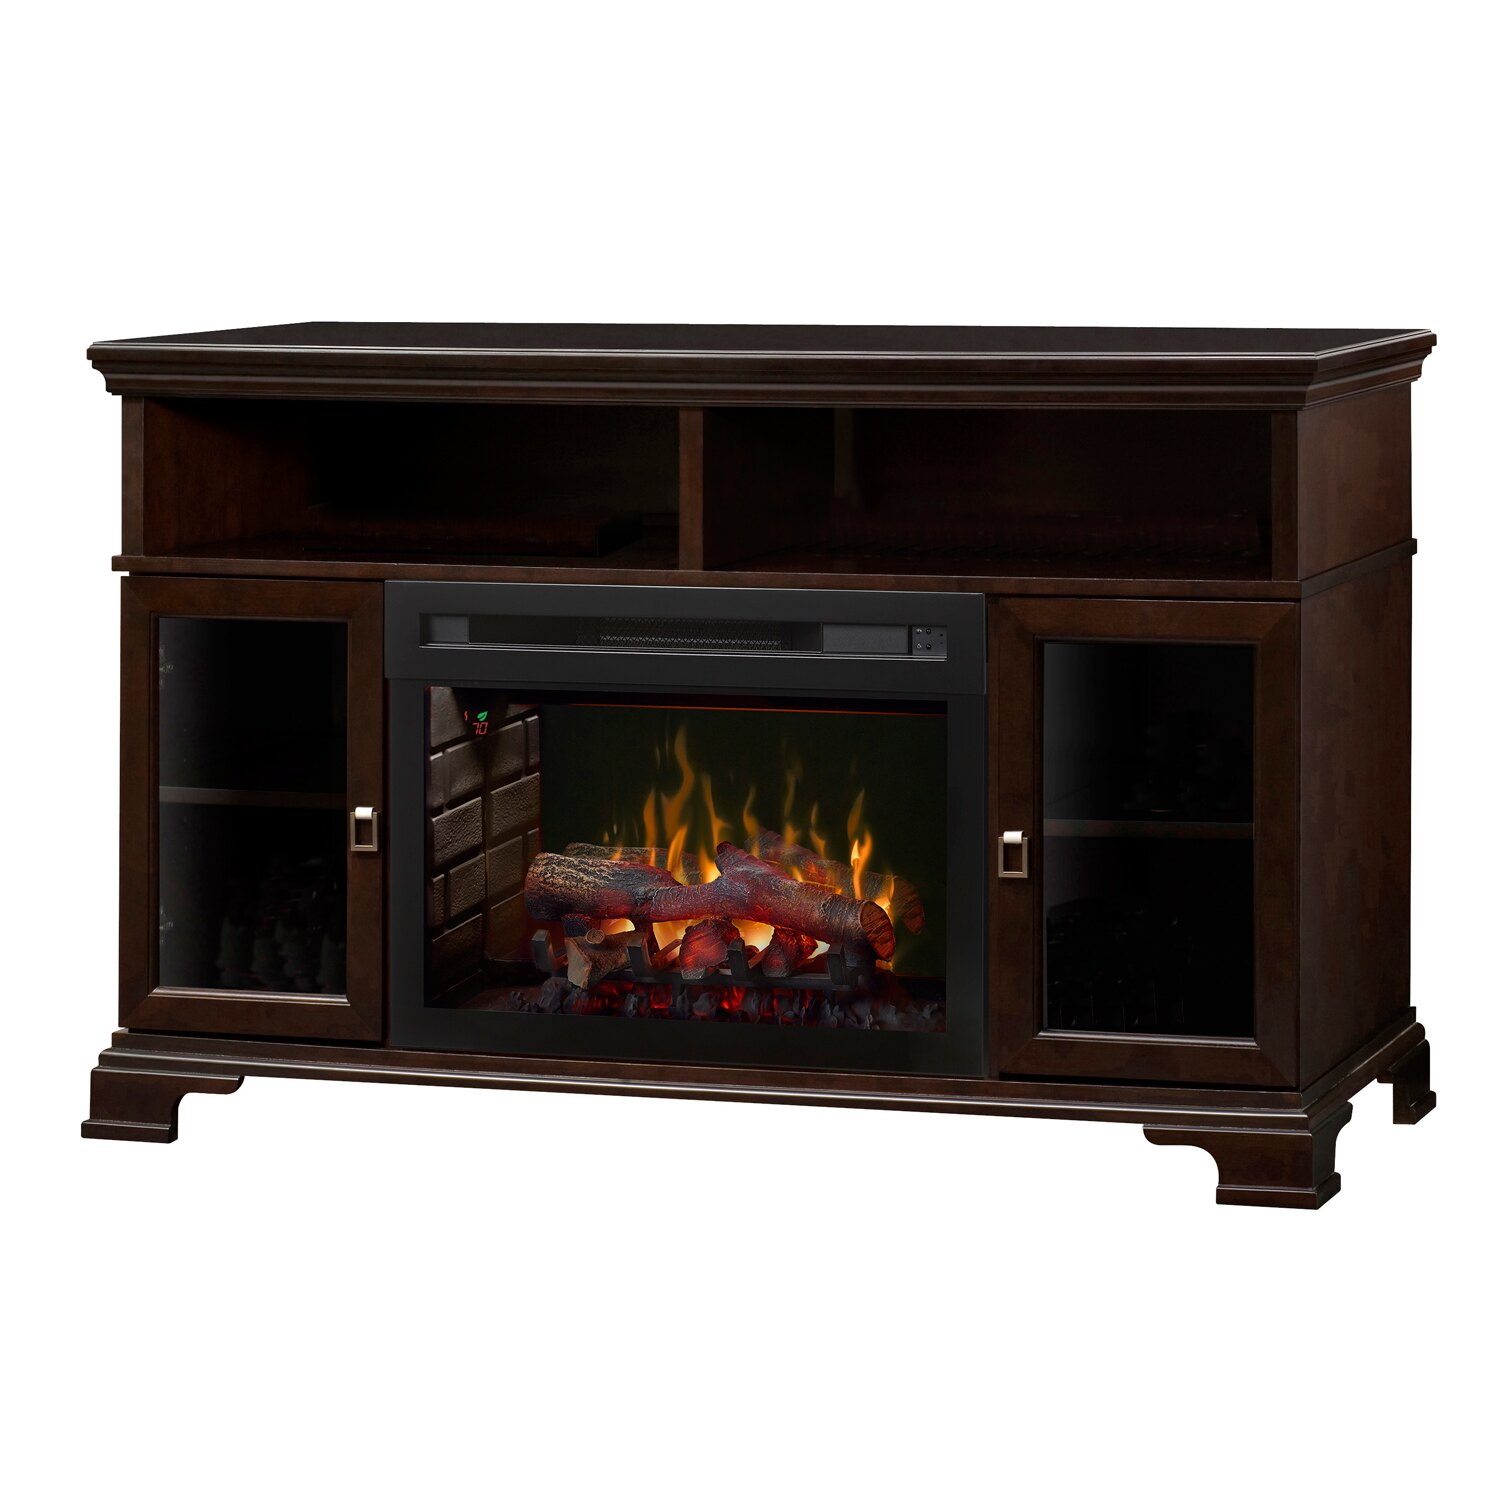 Heat Surge Electric Fireplace Manual Lovely Dimplex Electric Fireplace Brookings with Logs Espresso